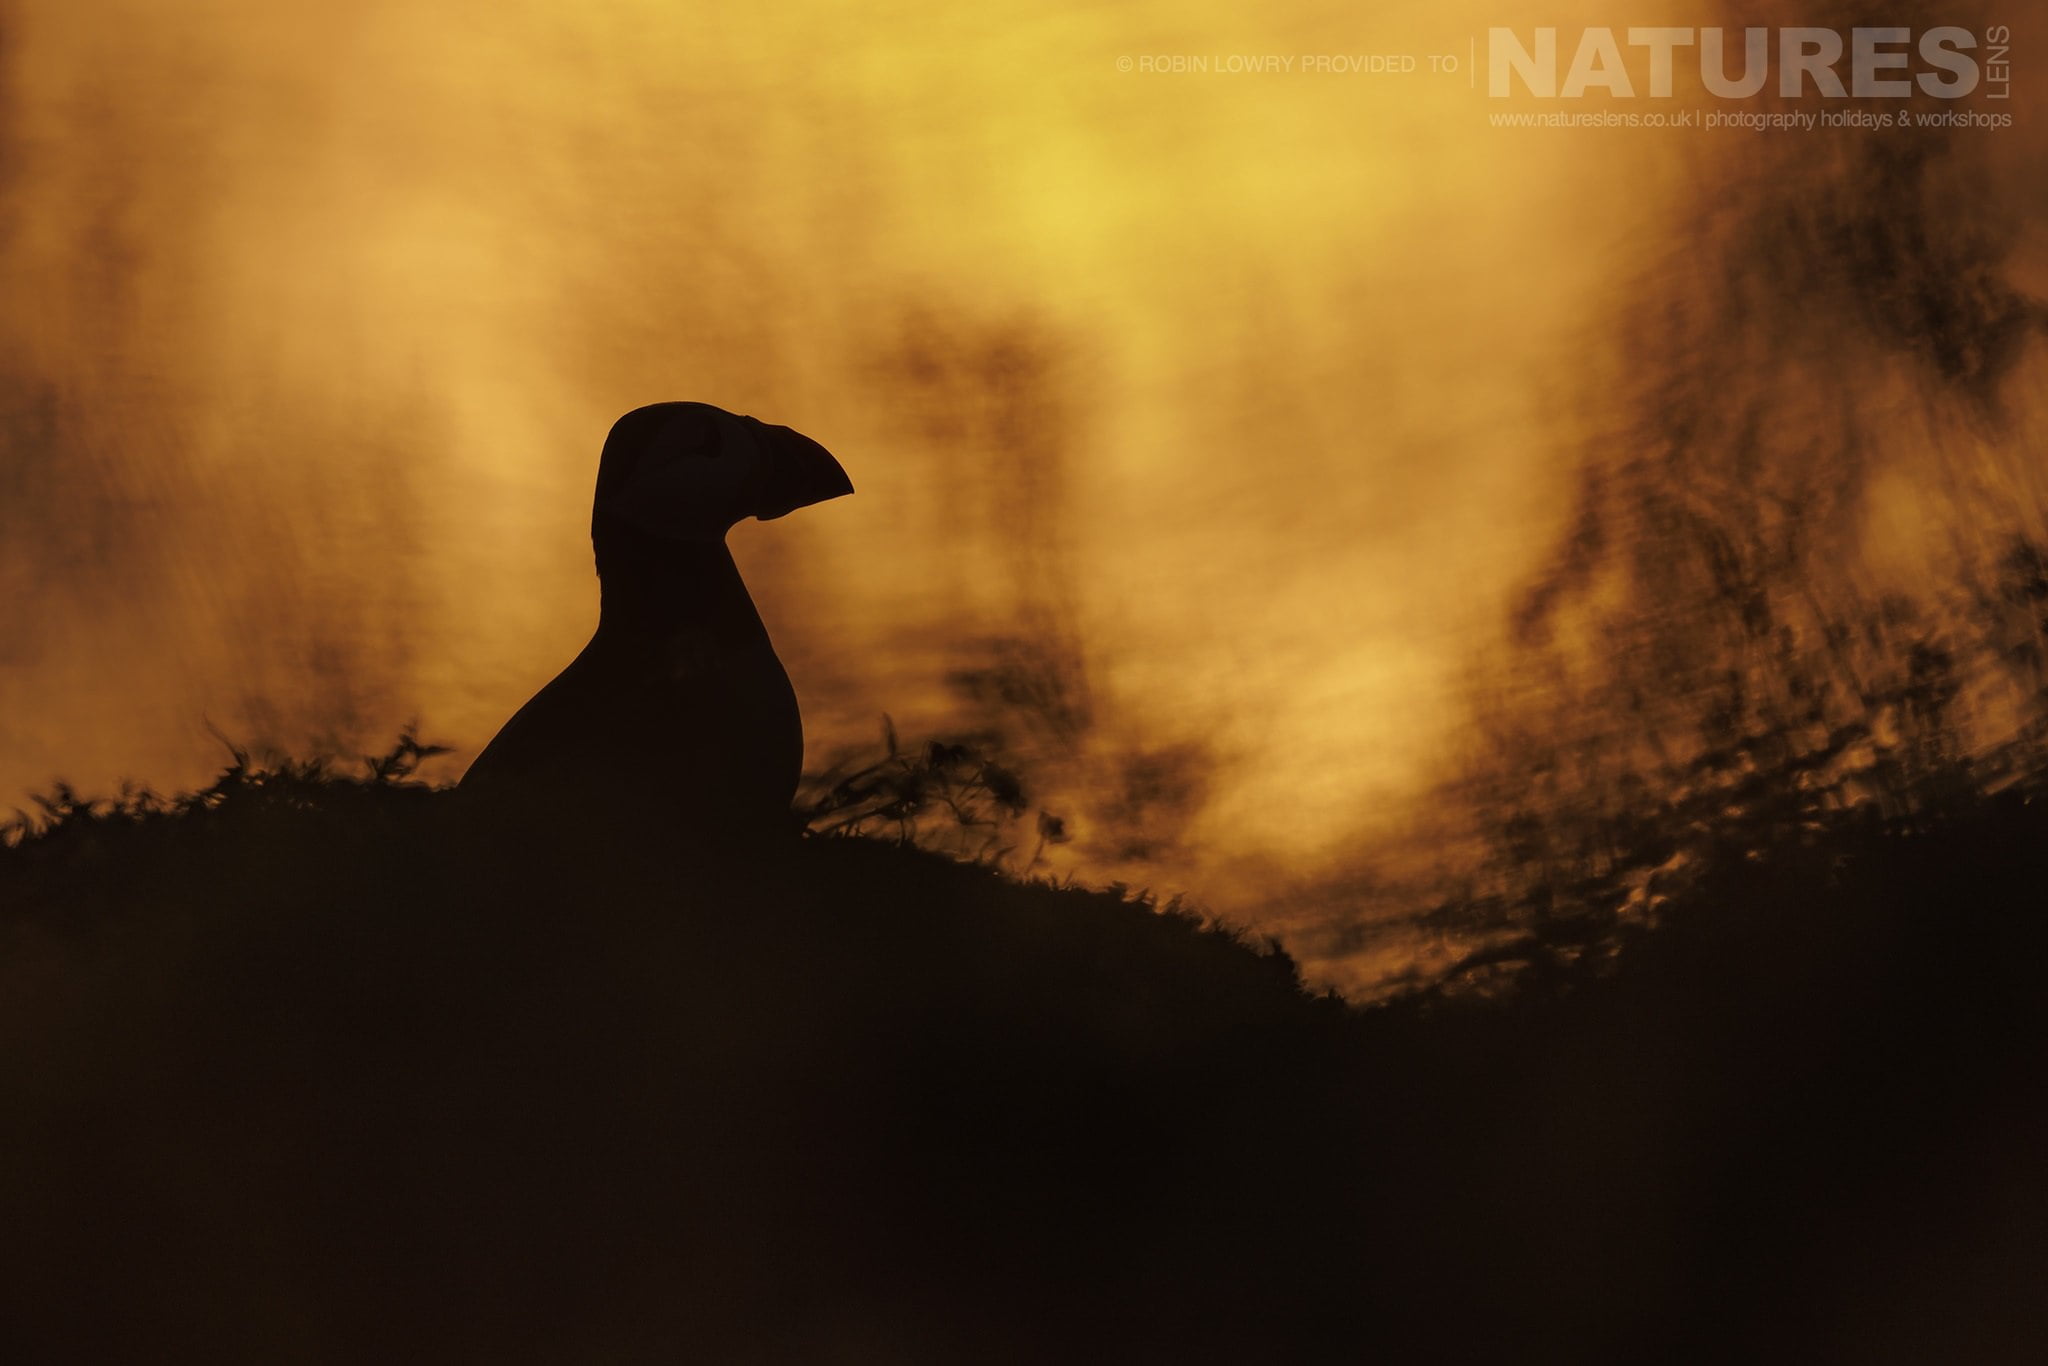 One of the Puffins of Skomer poses at sunset - this image was captured during the NaturesLens Comical Puffins of Skomer Island photography holiday